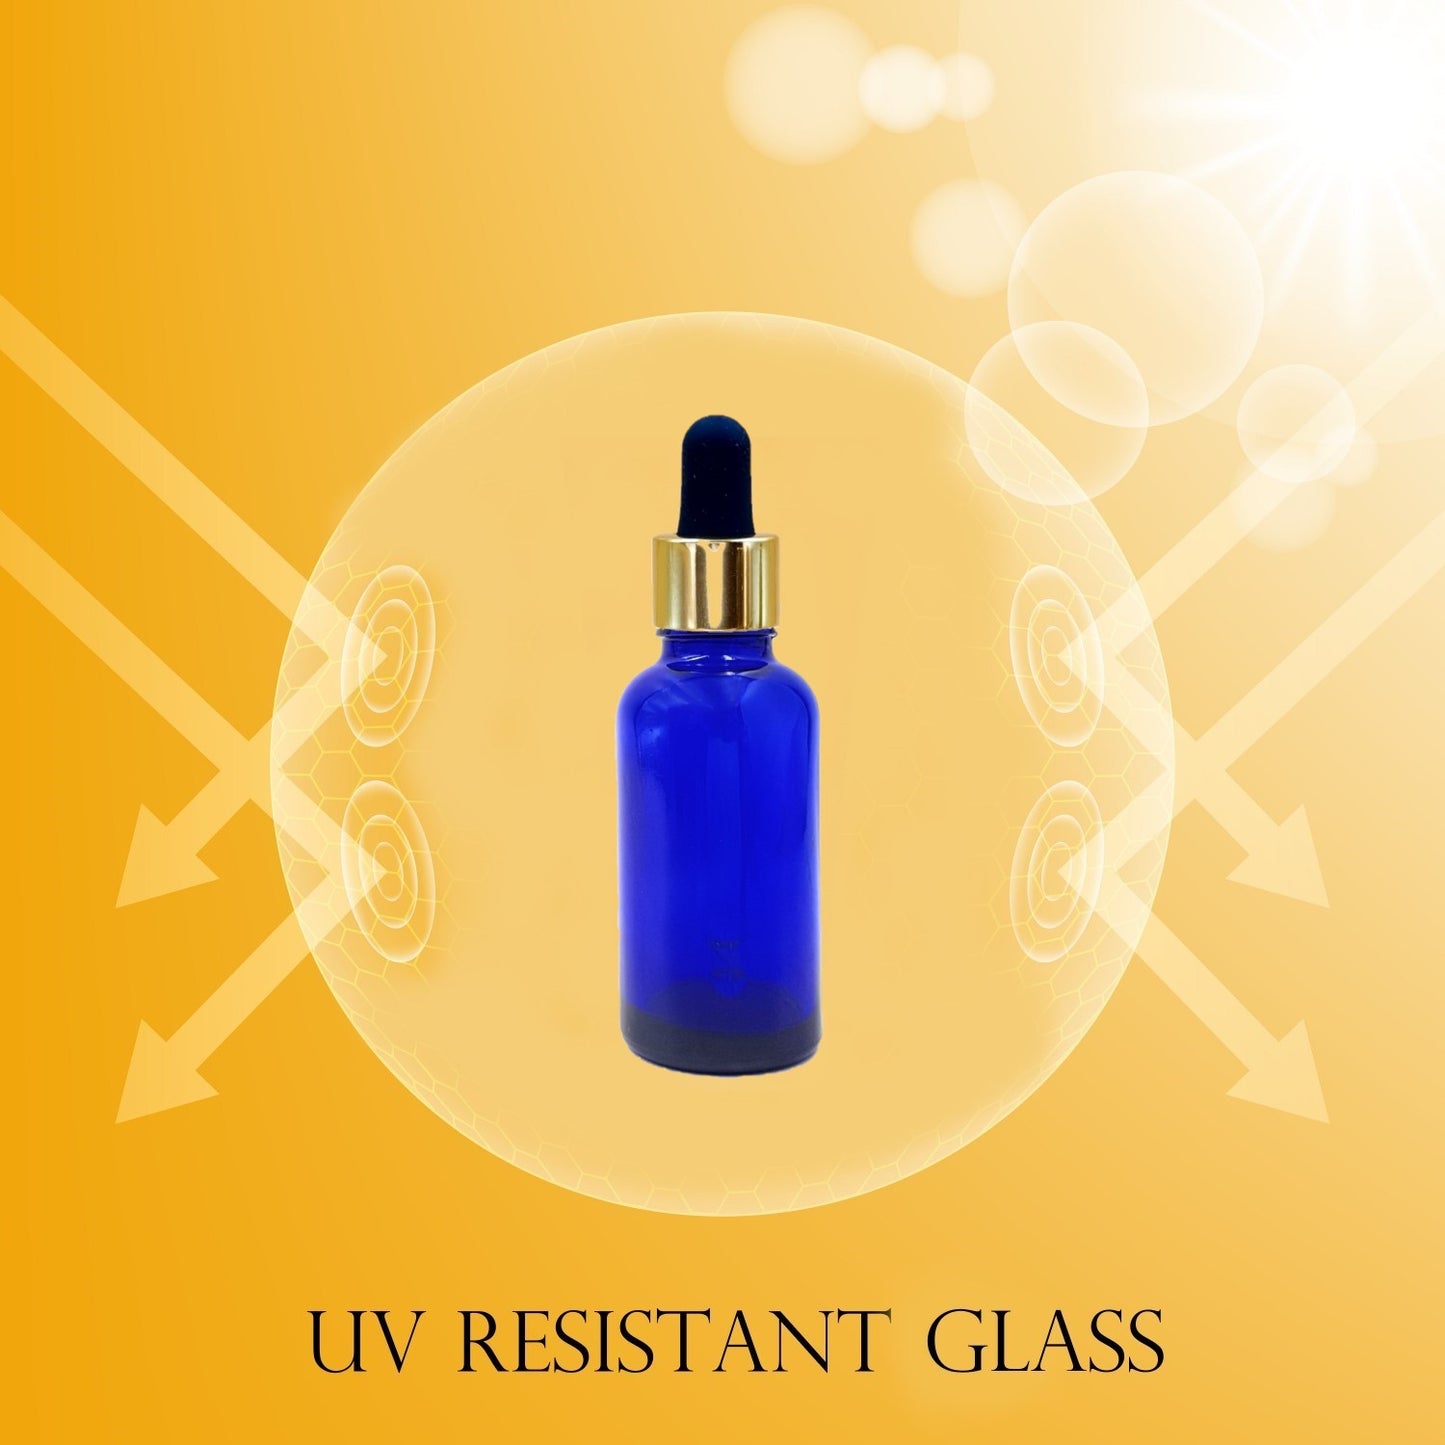 50ml Blue Glass Bottles with Gold/Black Glass Pipettes